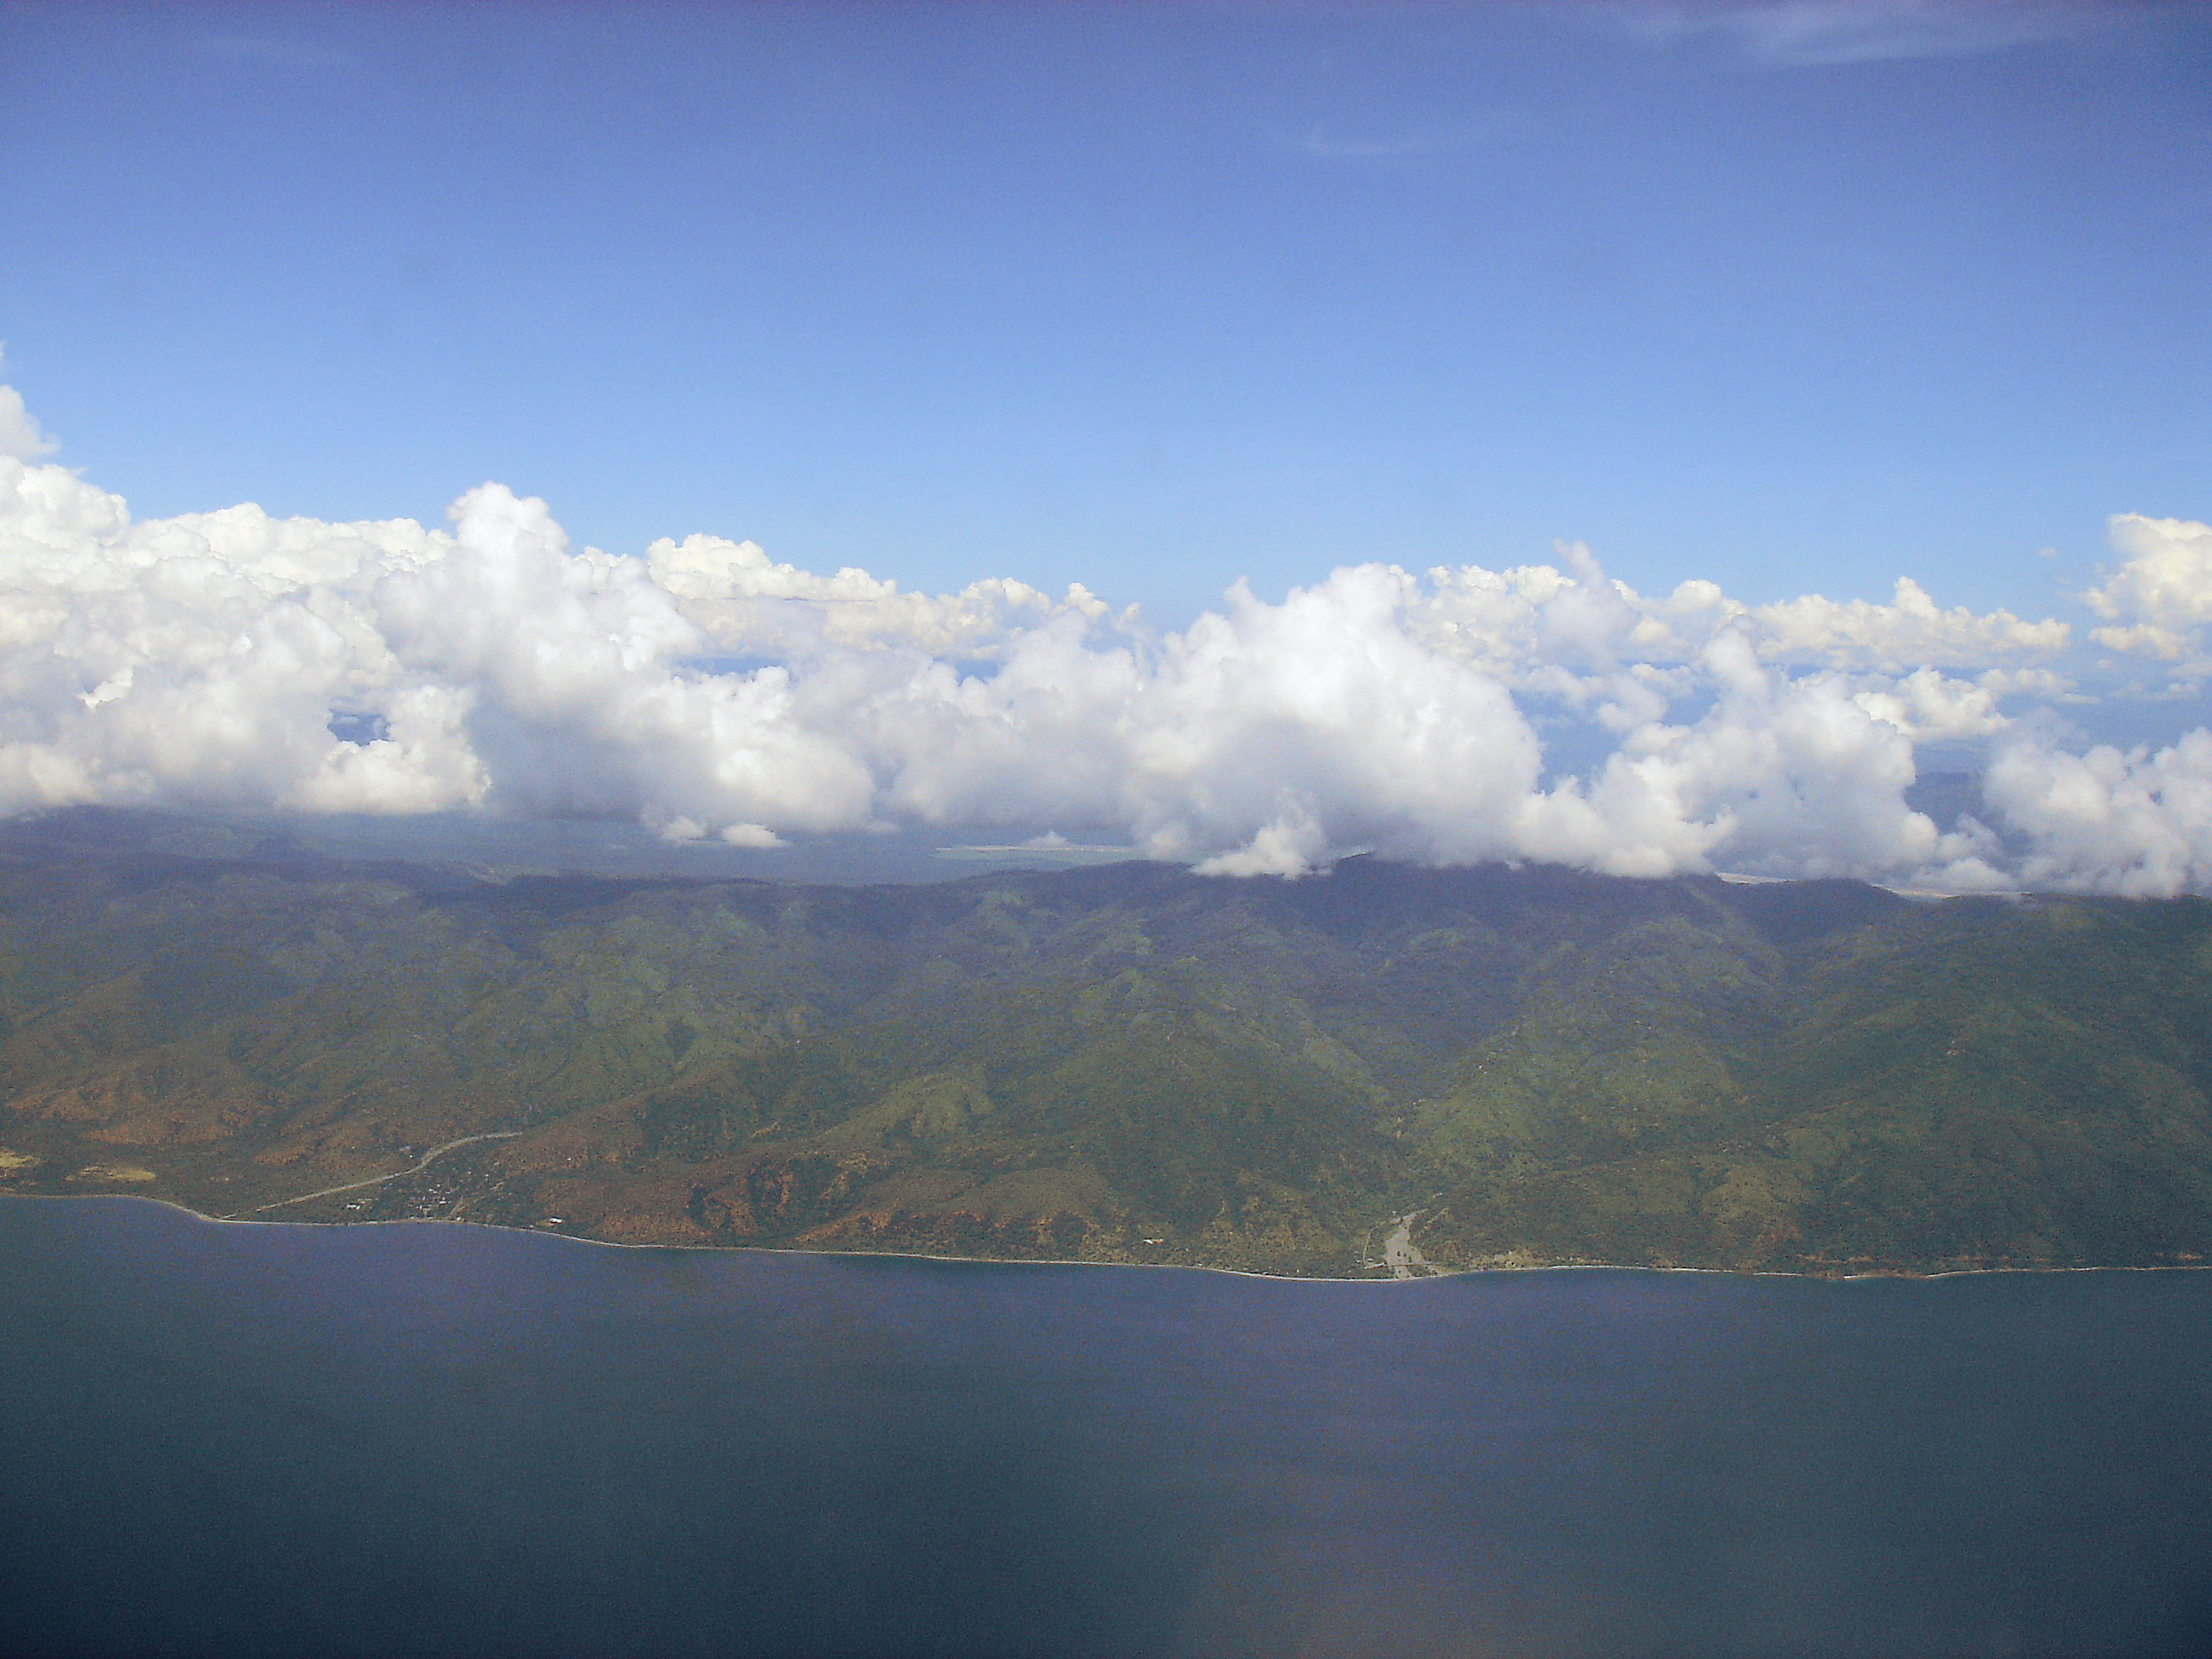 The Places of East Timor - View of East Timor from air